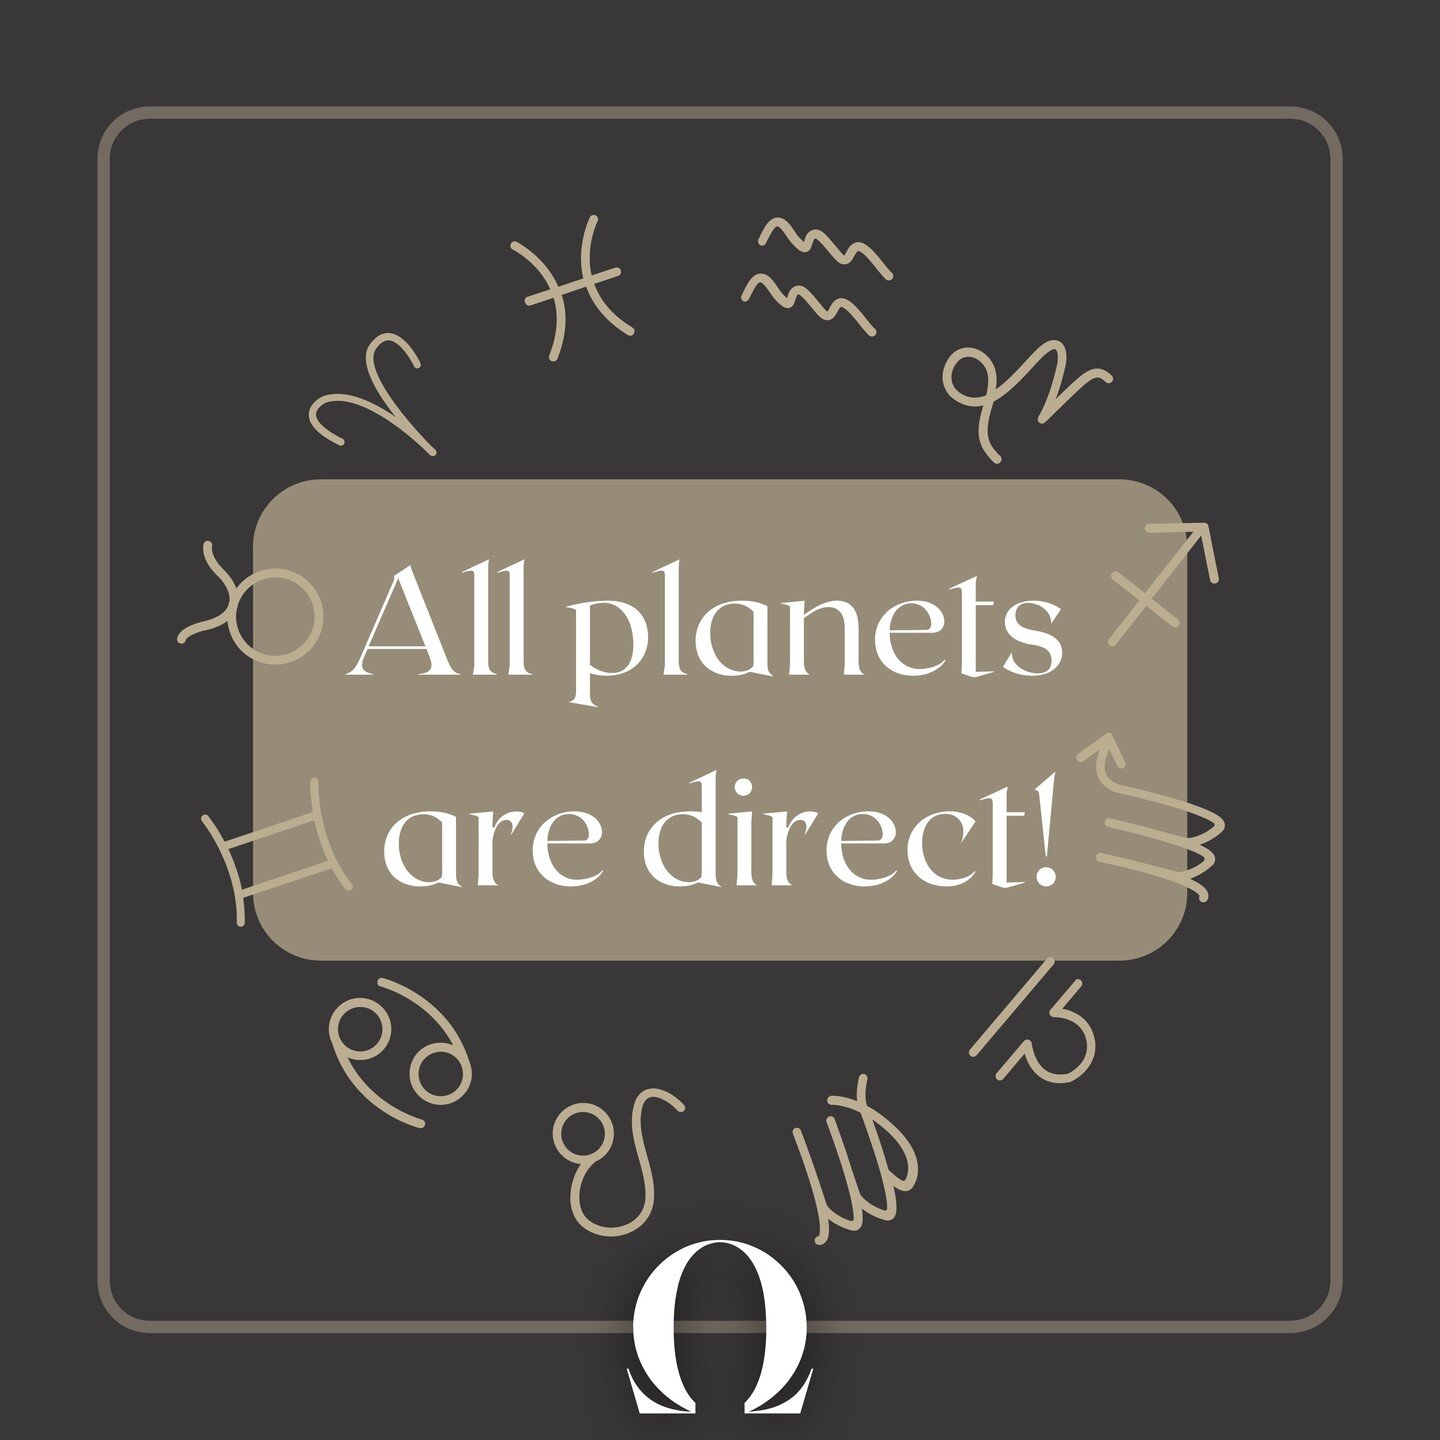 🙌All planets are direct🙌
&bull;&bull;&bull;
Have no fear, the retrogrades are over- for now. We have until April 29 with all planets running in forward motion. The gears are finally turning and the engines are hot and ready to rumble. This is go ti